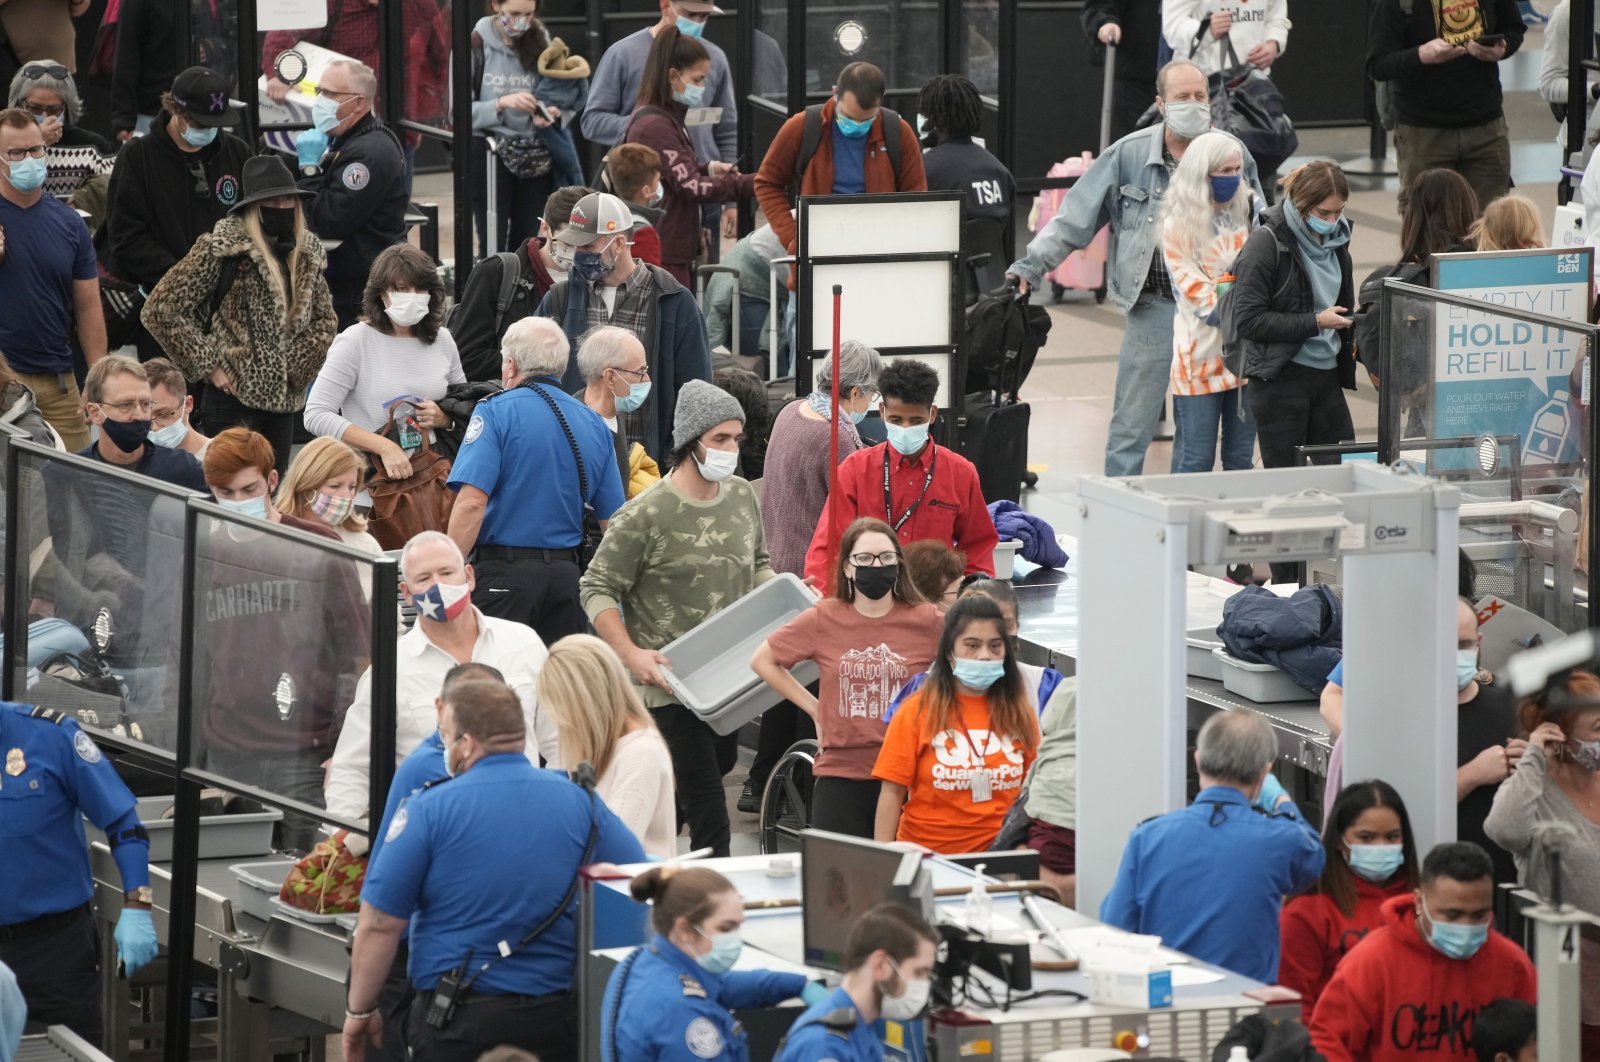 Travelers queue up at the south security checkpoint as traffic increases with the approach of the Thanksgiving Day holiday, Nov. 23, 2021, at Denver International Airport in Denver. (AP Photo)